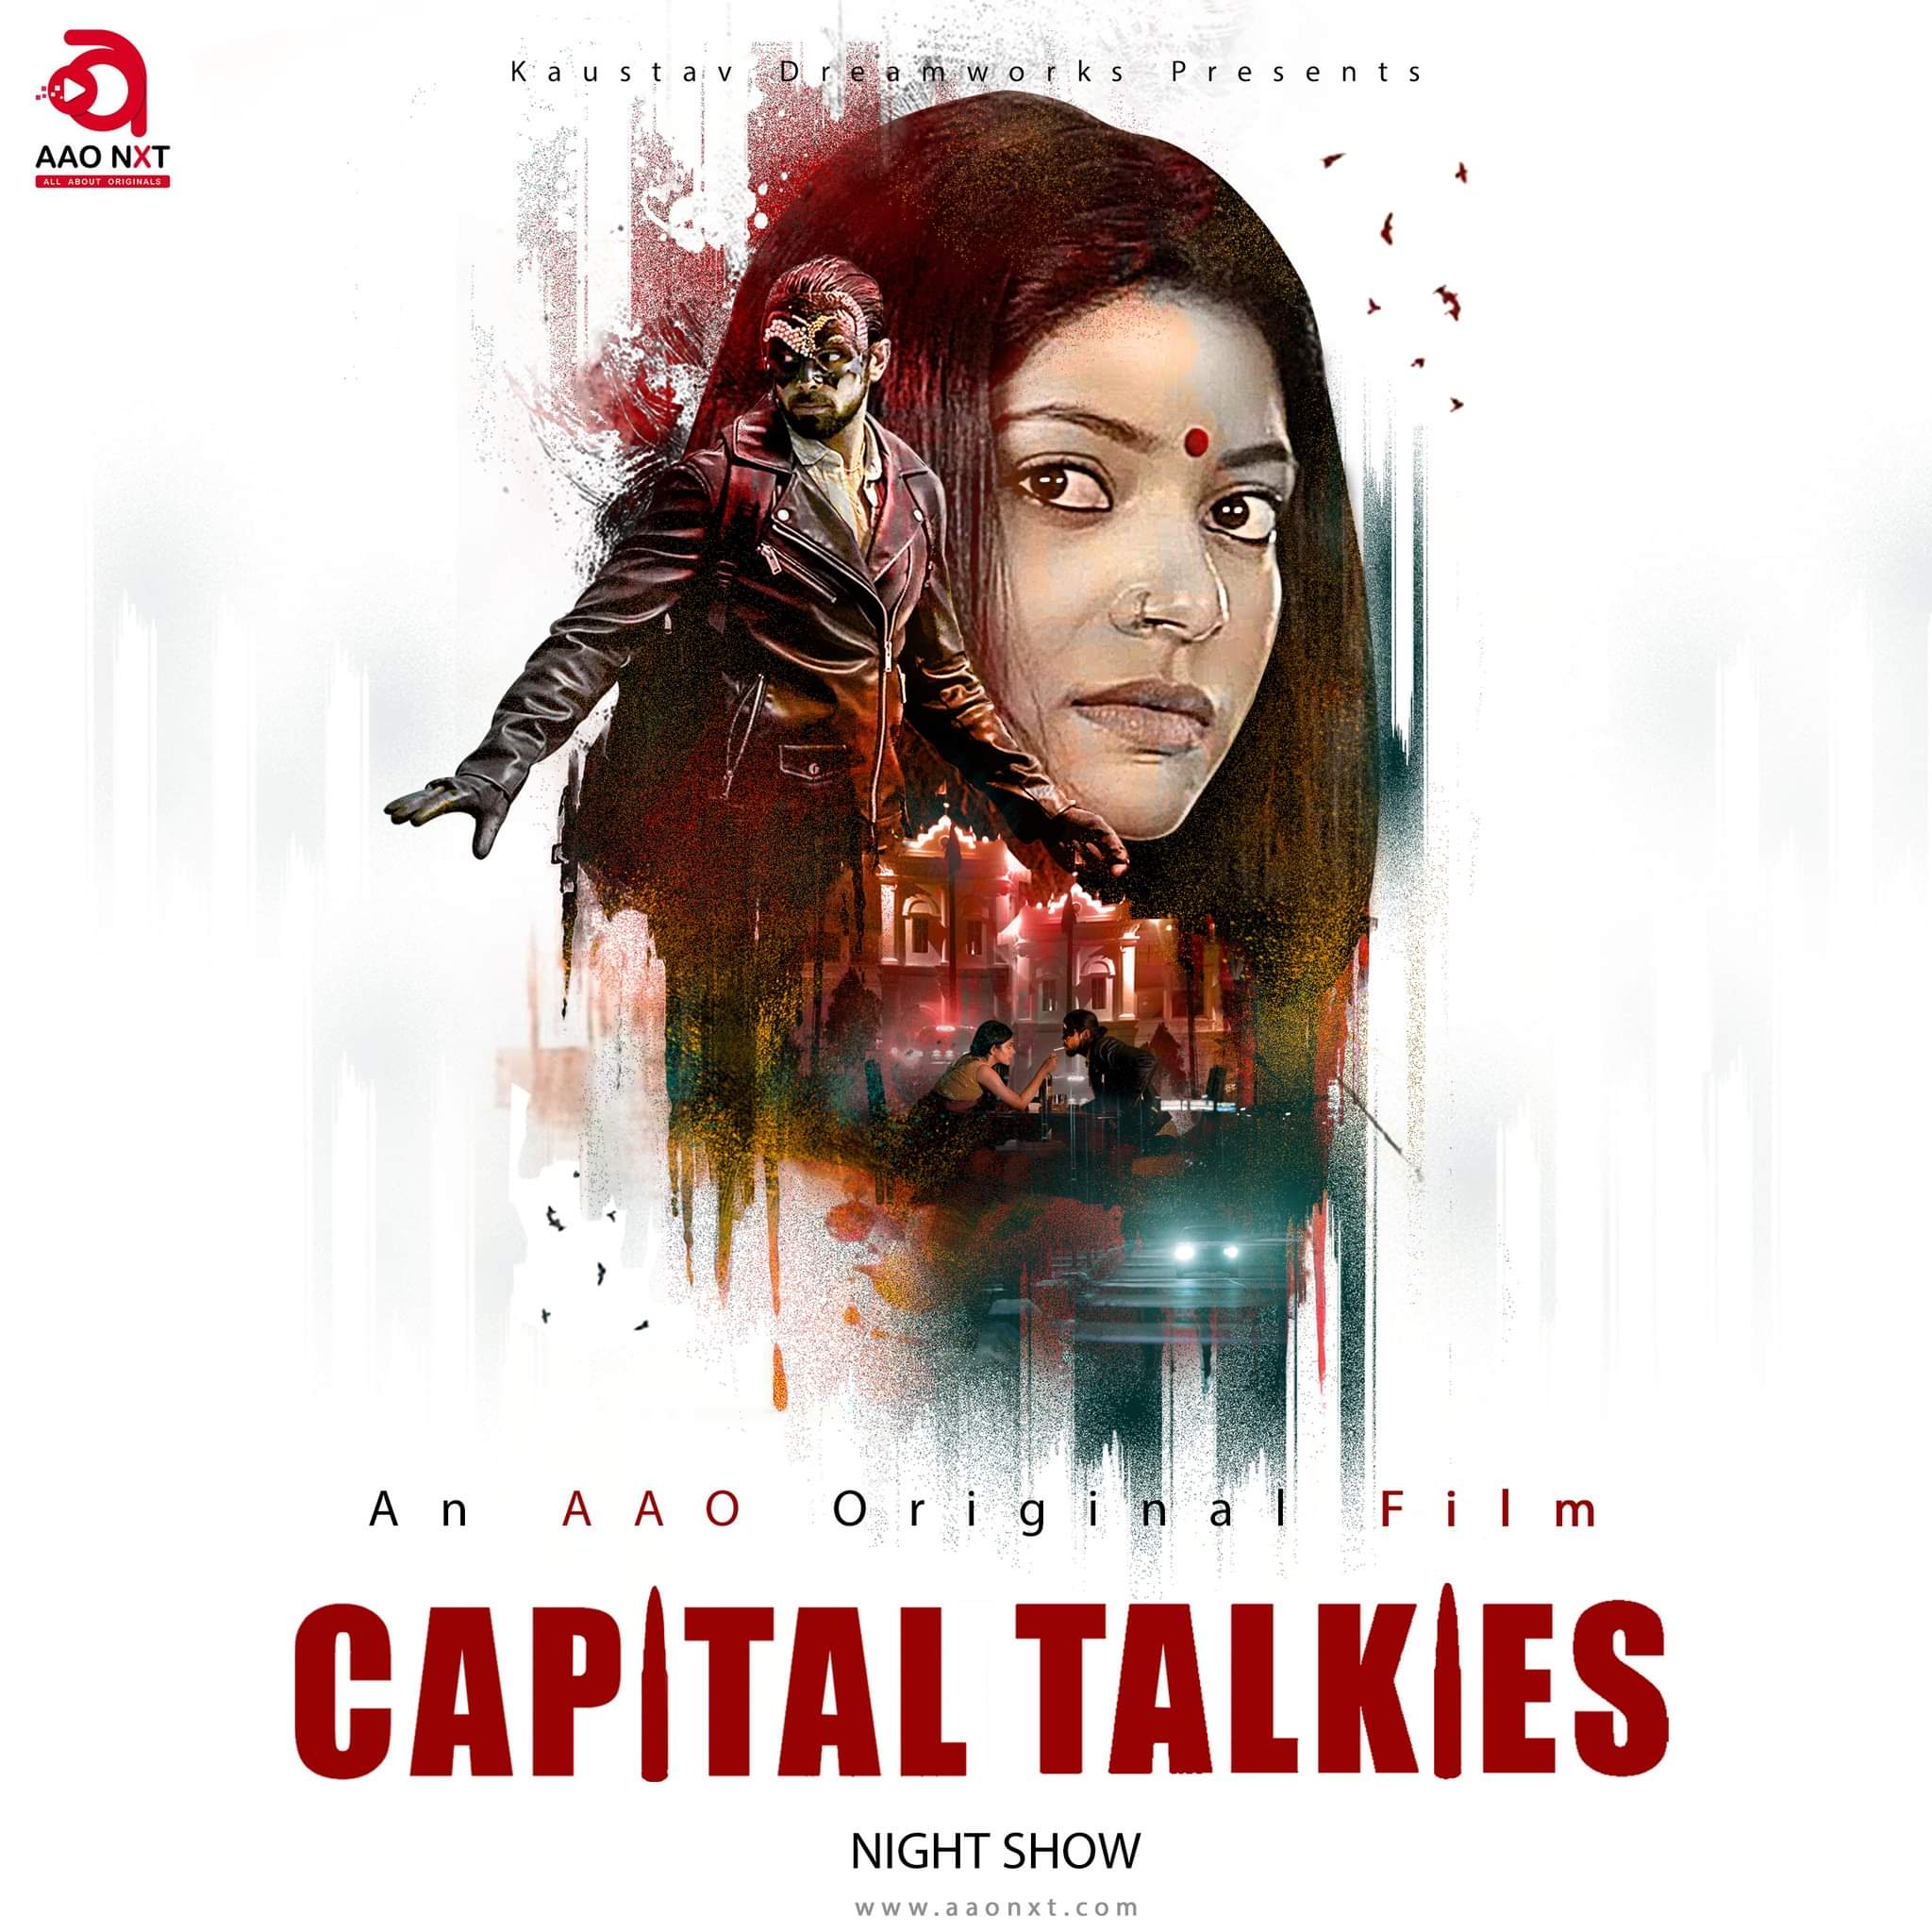 'Capital Talkies' official poster